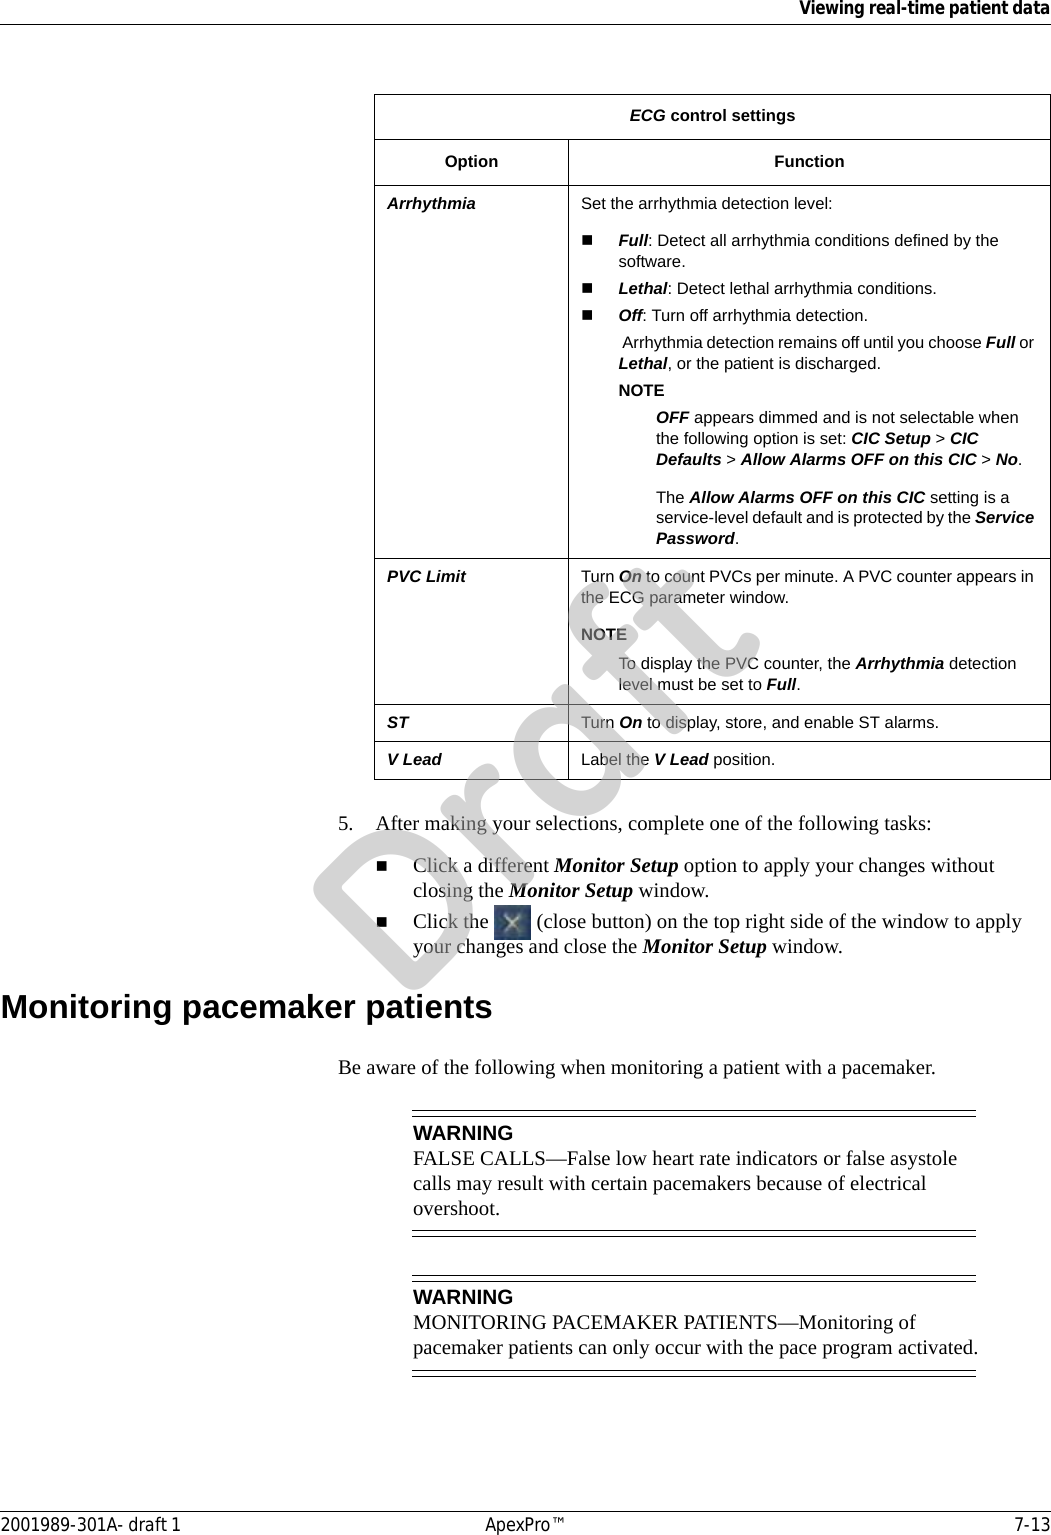 Viewing real-time patient data2001989-301A- draft 1 ApexPro™ 7-135. After making your selections, complete one of the following tasks:Click a different Monitor Setup option to apply your changes without closing the Monitor Setup window.Click the   (close button) on the top right side of the window to apply your changes and close the Monitor Setup window.Monitoring pacemaker patientsBe aware of the following when monitoring a patient with a pacemaker.WARNINGFALSE CALLS—False low heart rate indicators or false asystole calls may result with certain pacemakers because of electrical overshoot.WARNINGMONITORING PACEMAKER PATIENTS—Monitoring of pacemaker patients can only occur with the pace program activated.Arrhythmia Set the arrhythmia detection level:Full: Detect all arrhythmia conditions defined by the software.Lethal: Detect lethal arrhythmia conditions.Off: Turn off arrhythmia detection. Arrhythmia detection remains off until you choose Full or Lethal, or the patient is discharged.NOTEOFF appears dimmed and is not selectable when the following option is set: CIC Setup &gt; CIC Defaults &gt; Allow Alarms OFF on this CIC &gt; No. The Allow Alarms OFF on this CIC setting is a service-level default and is protected by the Service Password.PVC Limit Turn On to count PVCs per minute. A PVC counter appears in the ECG parameter window.NOTETo display the PVC counter, the Arrhythmia detection level must be set to Full.ST Turn On to display, store, and enable ST alarms.V Lead Label the V Lead position.ECG control settingsOption FunctionDraft